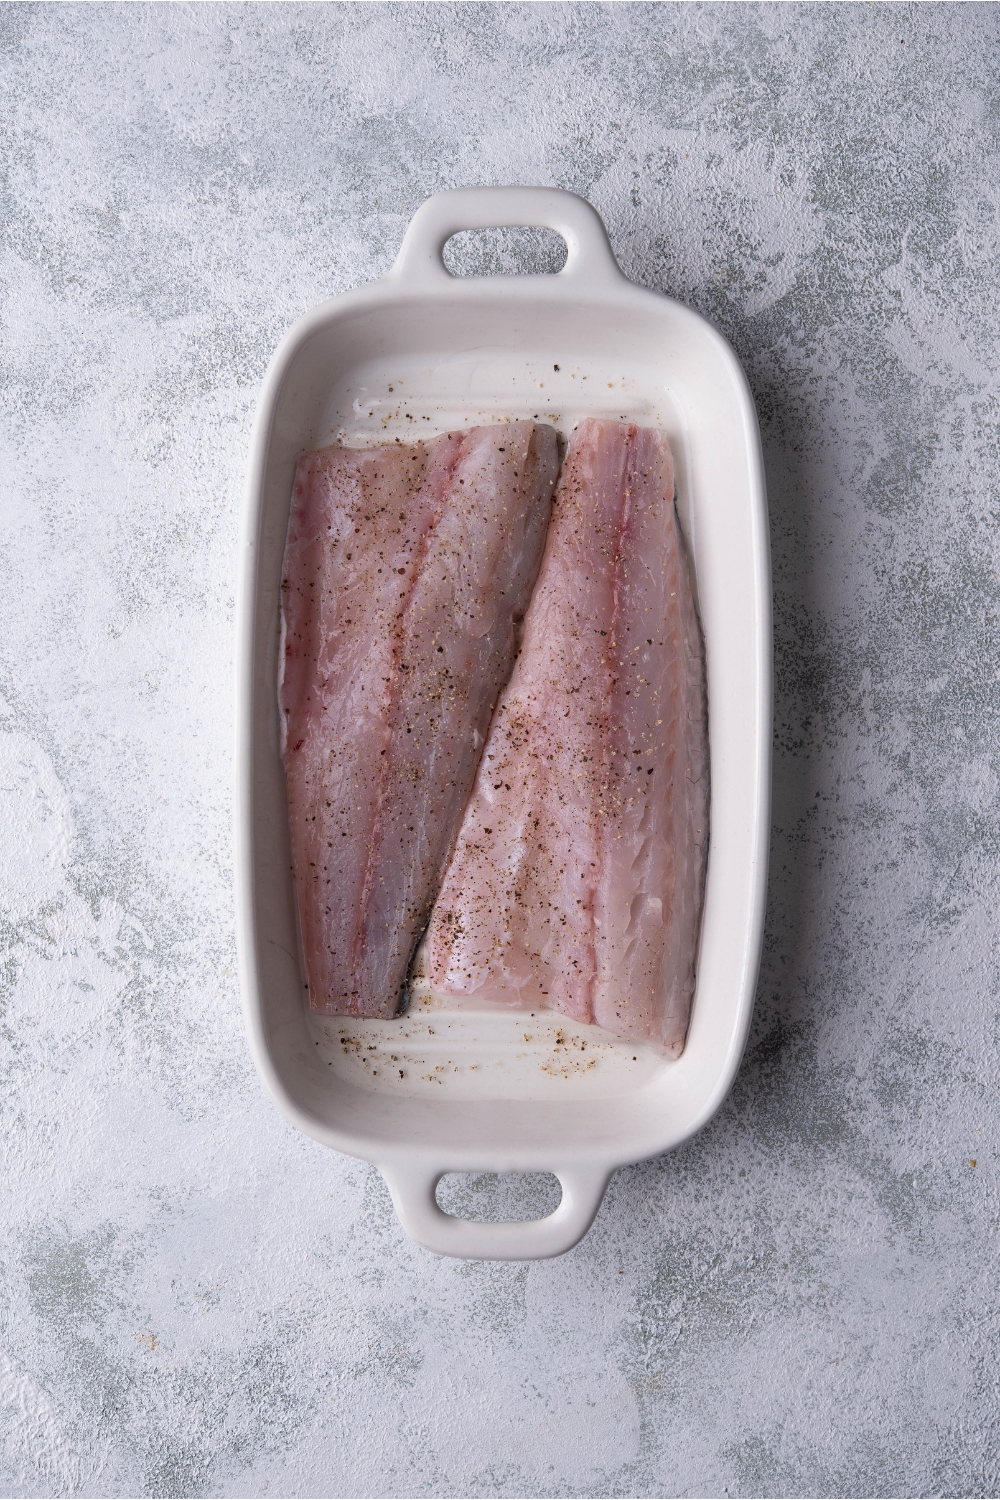 Two raw fish fillets seasoned with pepper in a white baking dish.